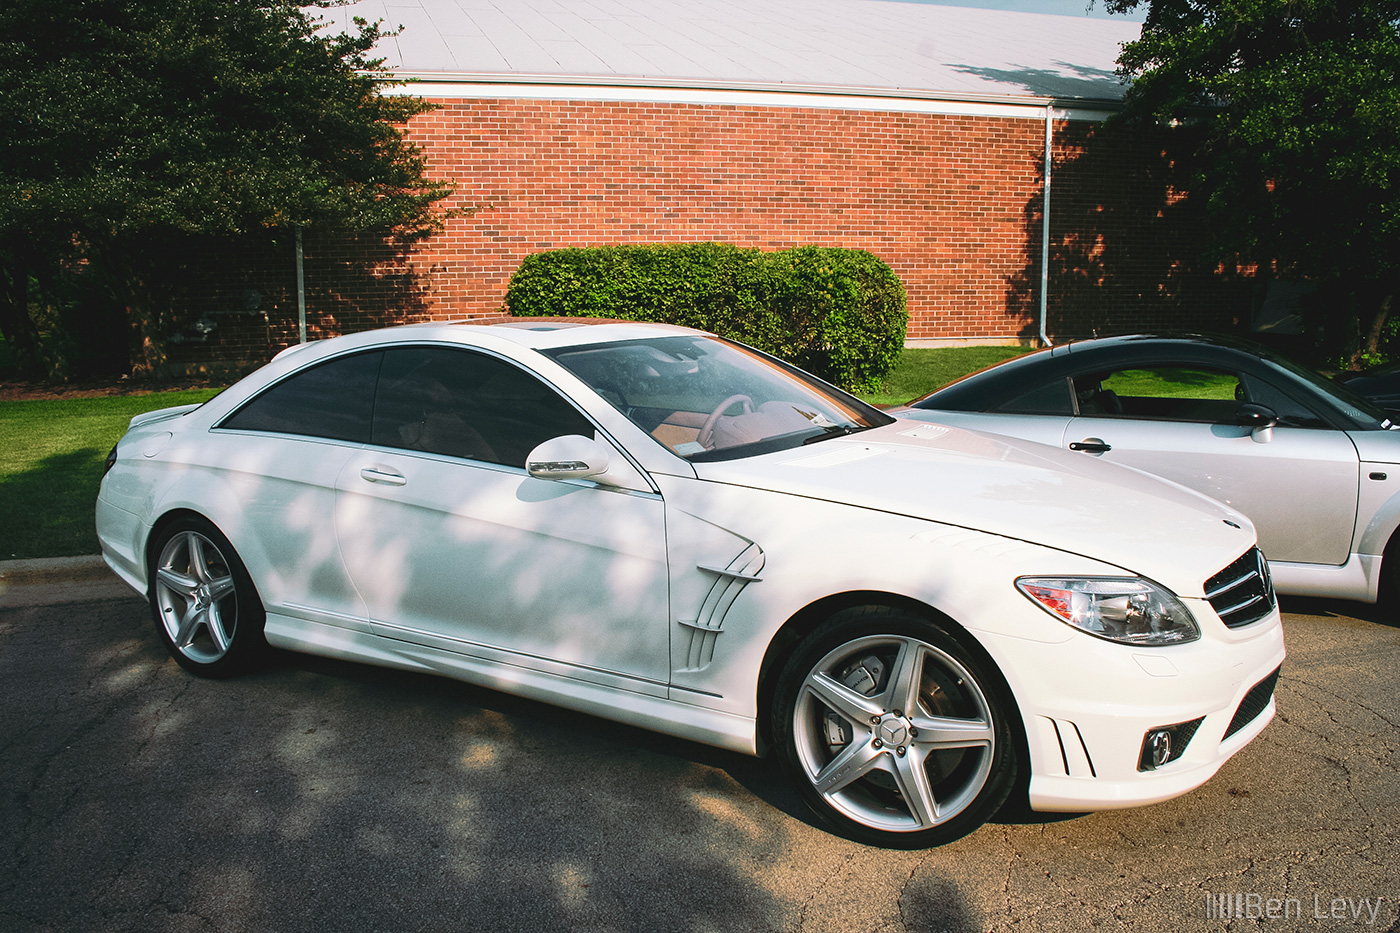 cls 63 amg. White CL 63 AMG